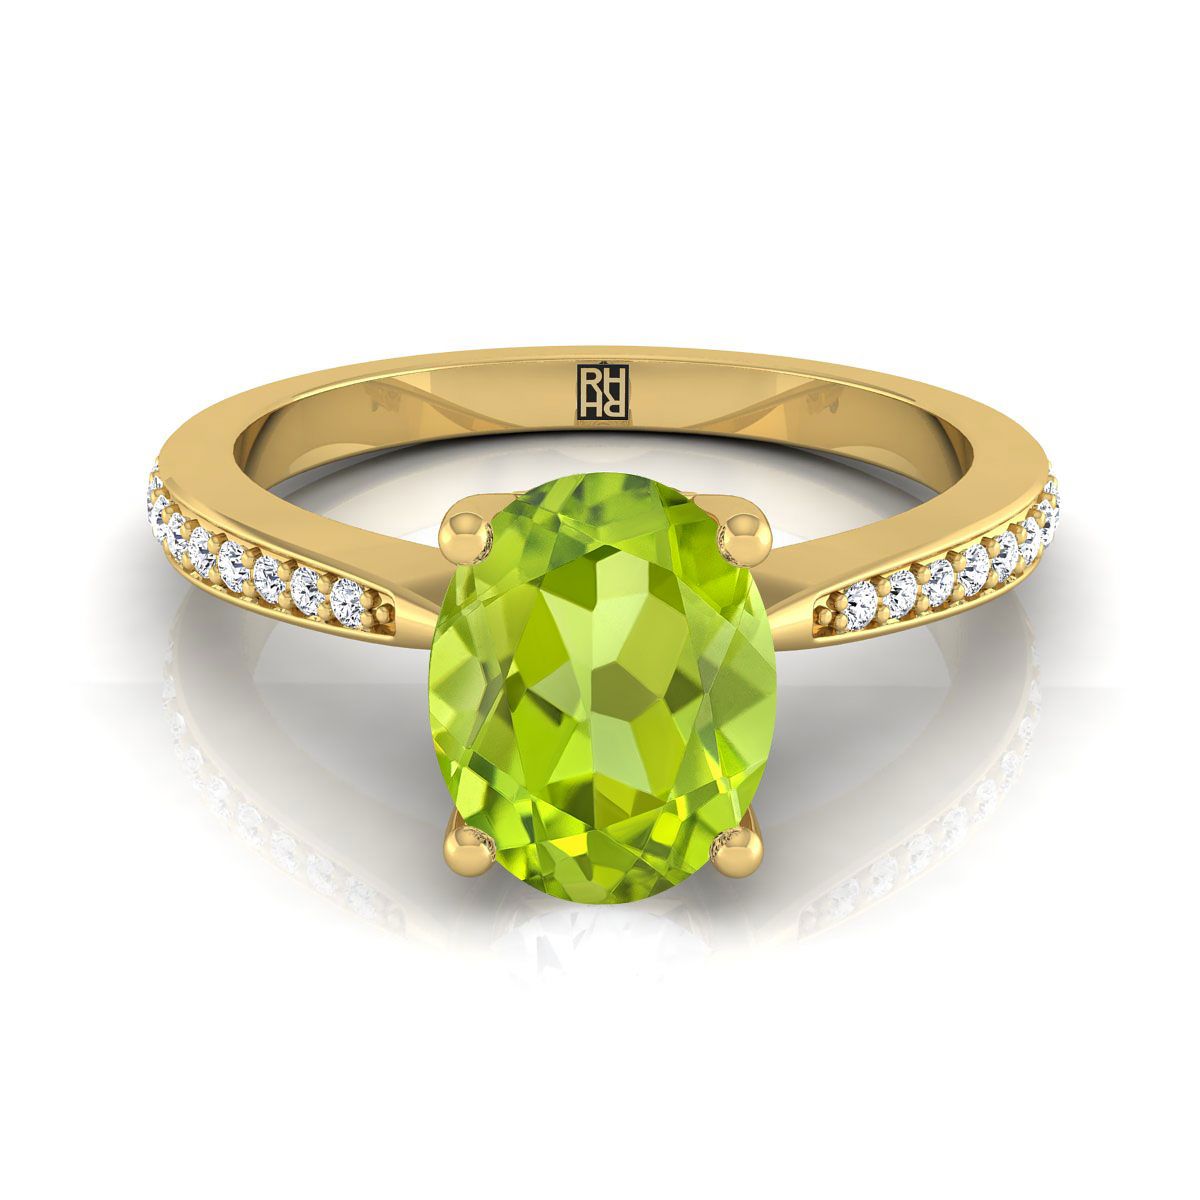 18K Yellow Gold Oval Peridot Tapered Pave Diamond Engagement Ring -1/8ctw